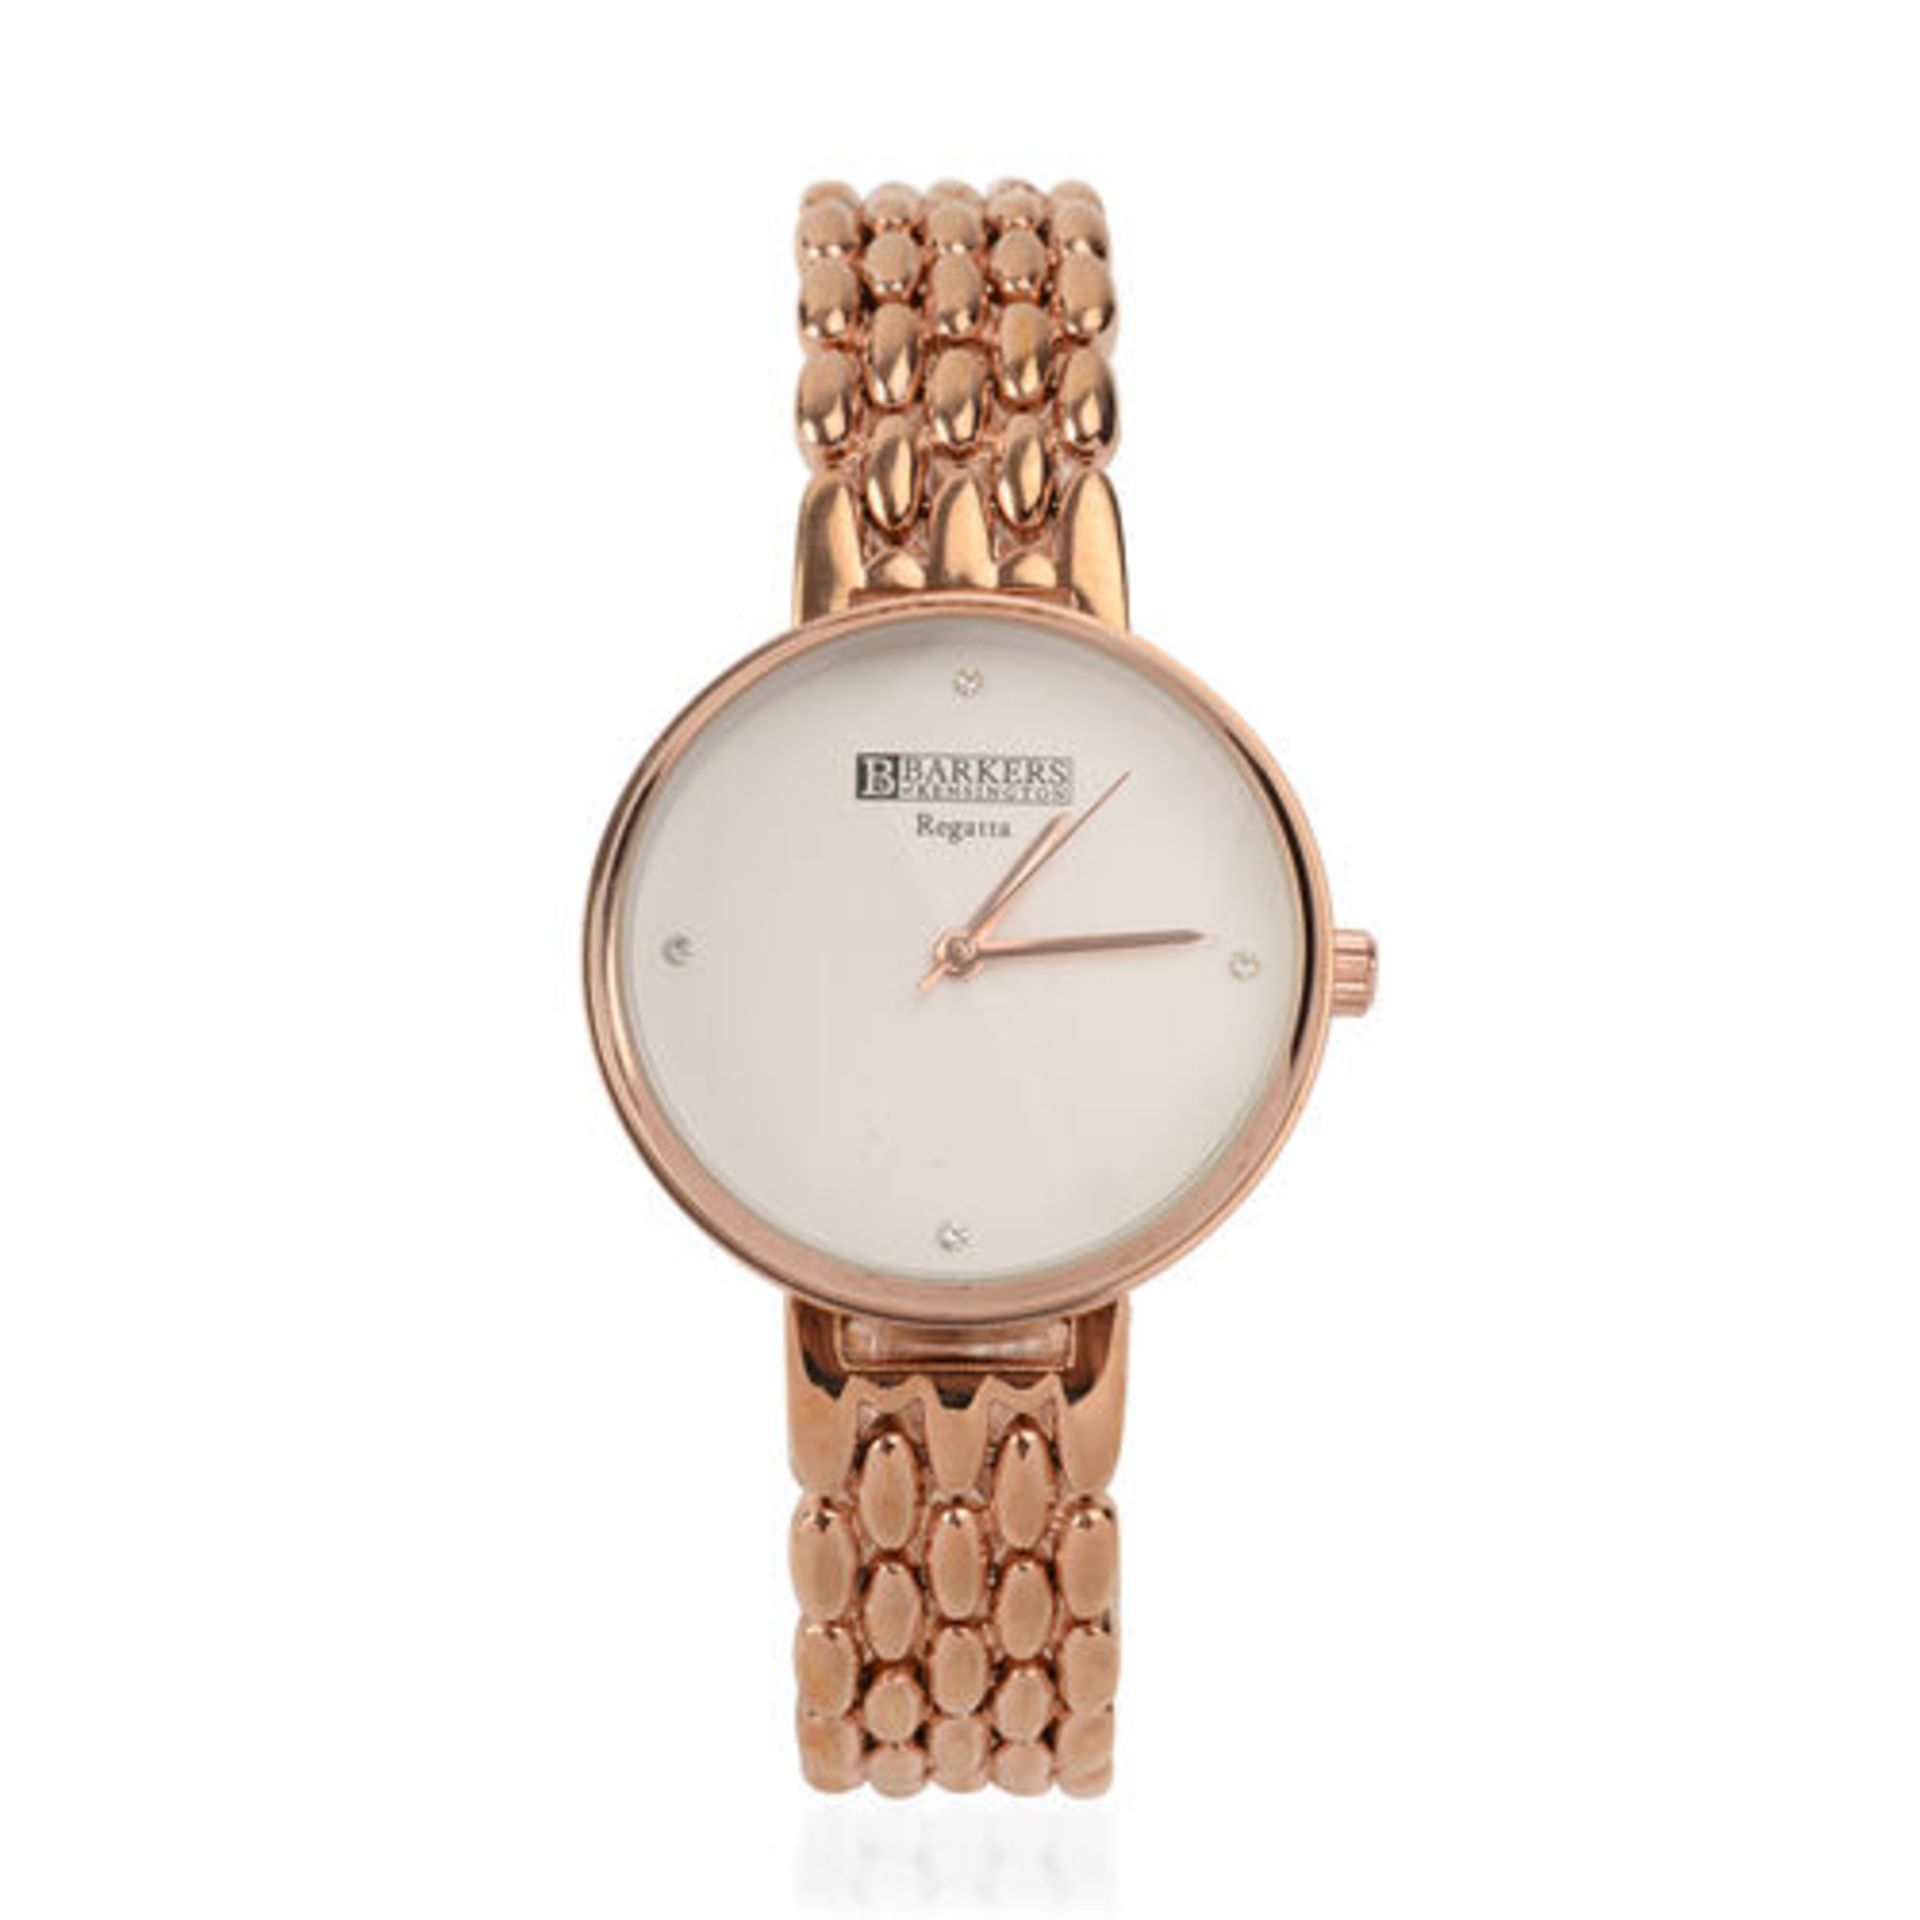 Barkers of Kensington Regatta White Face with Crystals Women's stylish Watch, new and boxed.